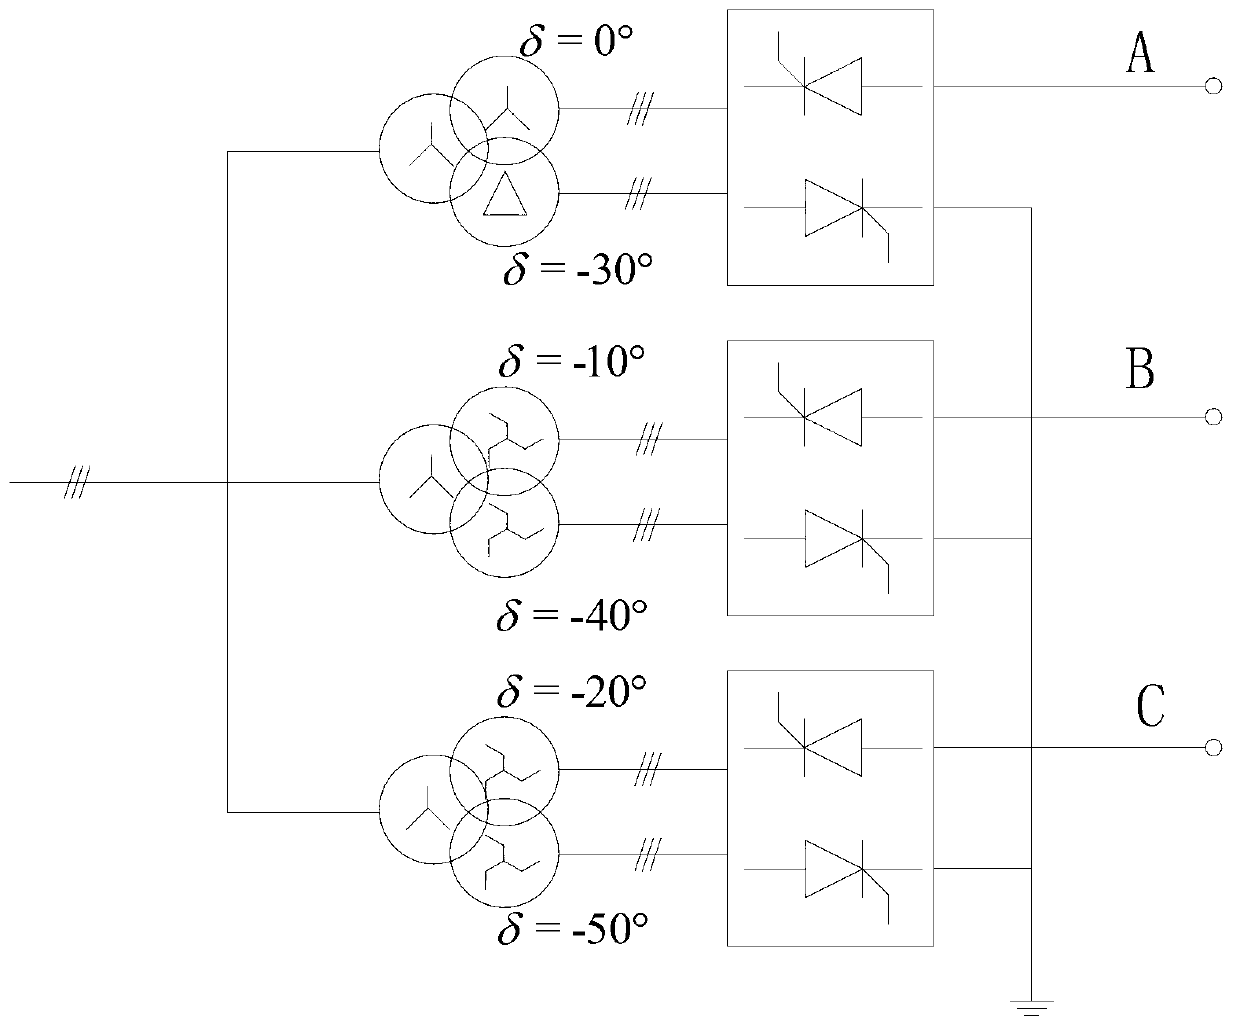 Improved alternative current-alternative current frequency converter system through utilization of phase-shifting transformer